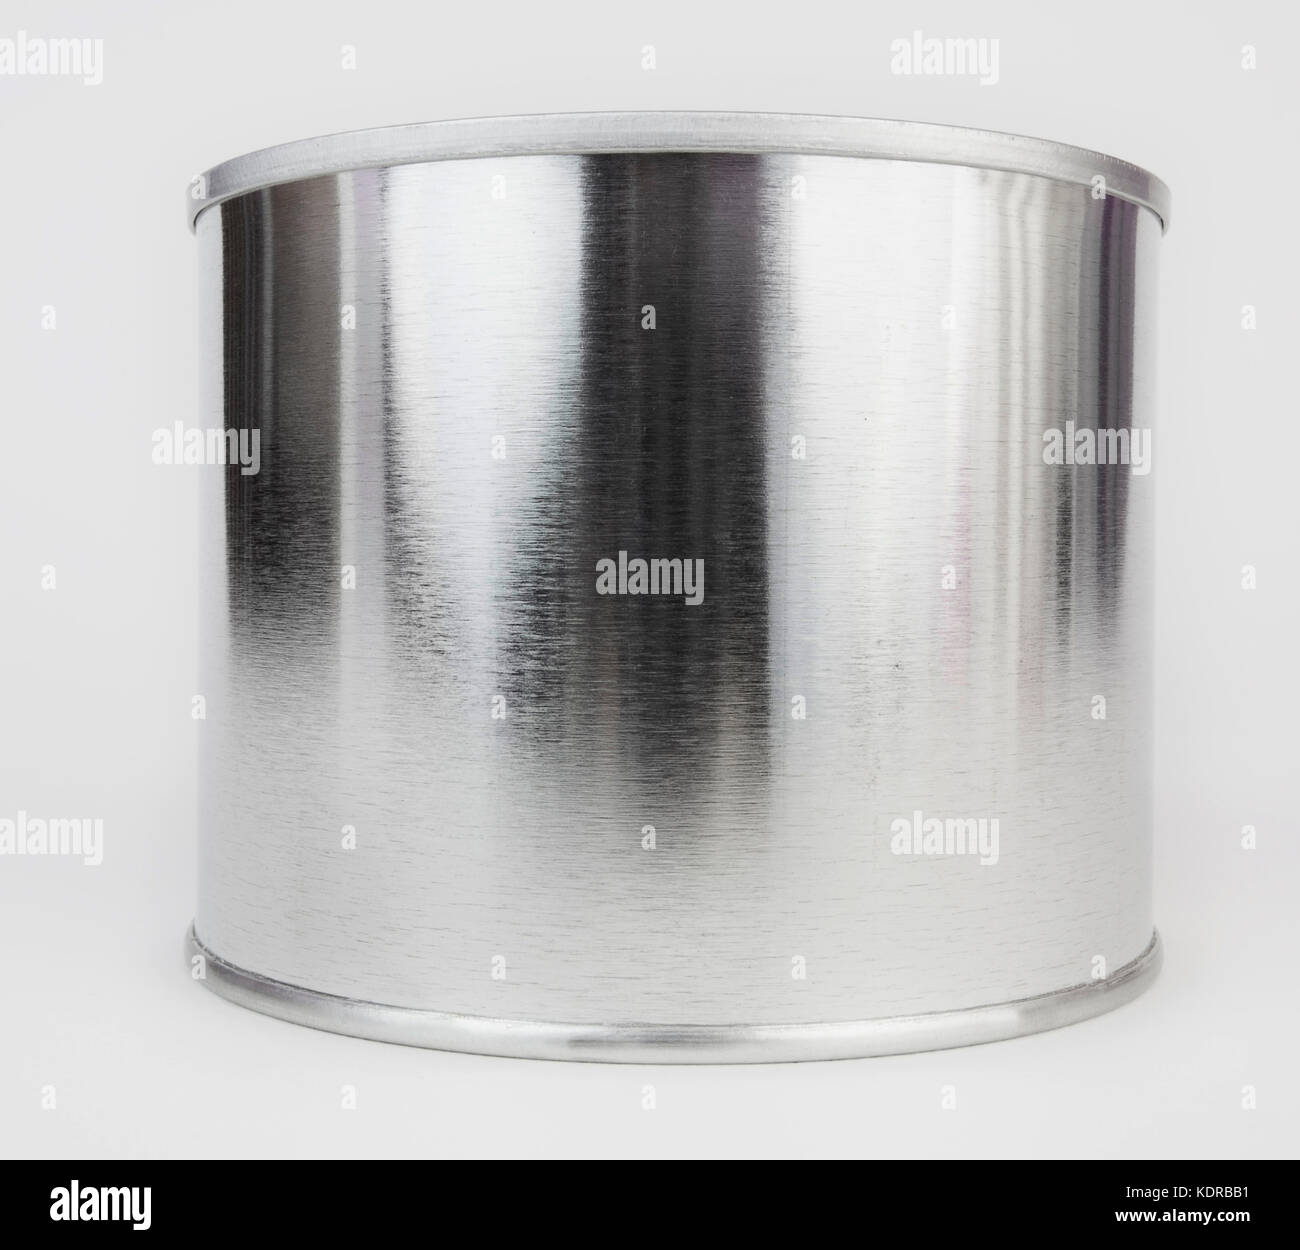 Short and squat shiny closed food container. White background. Stock Photo